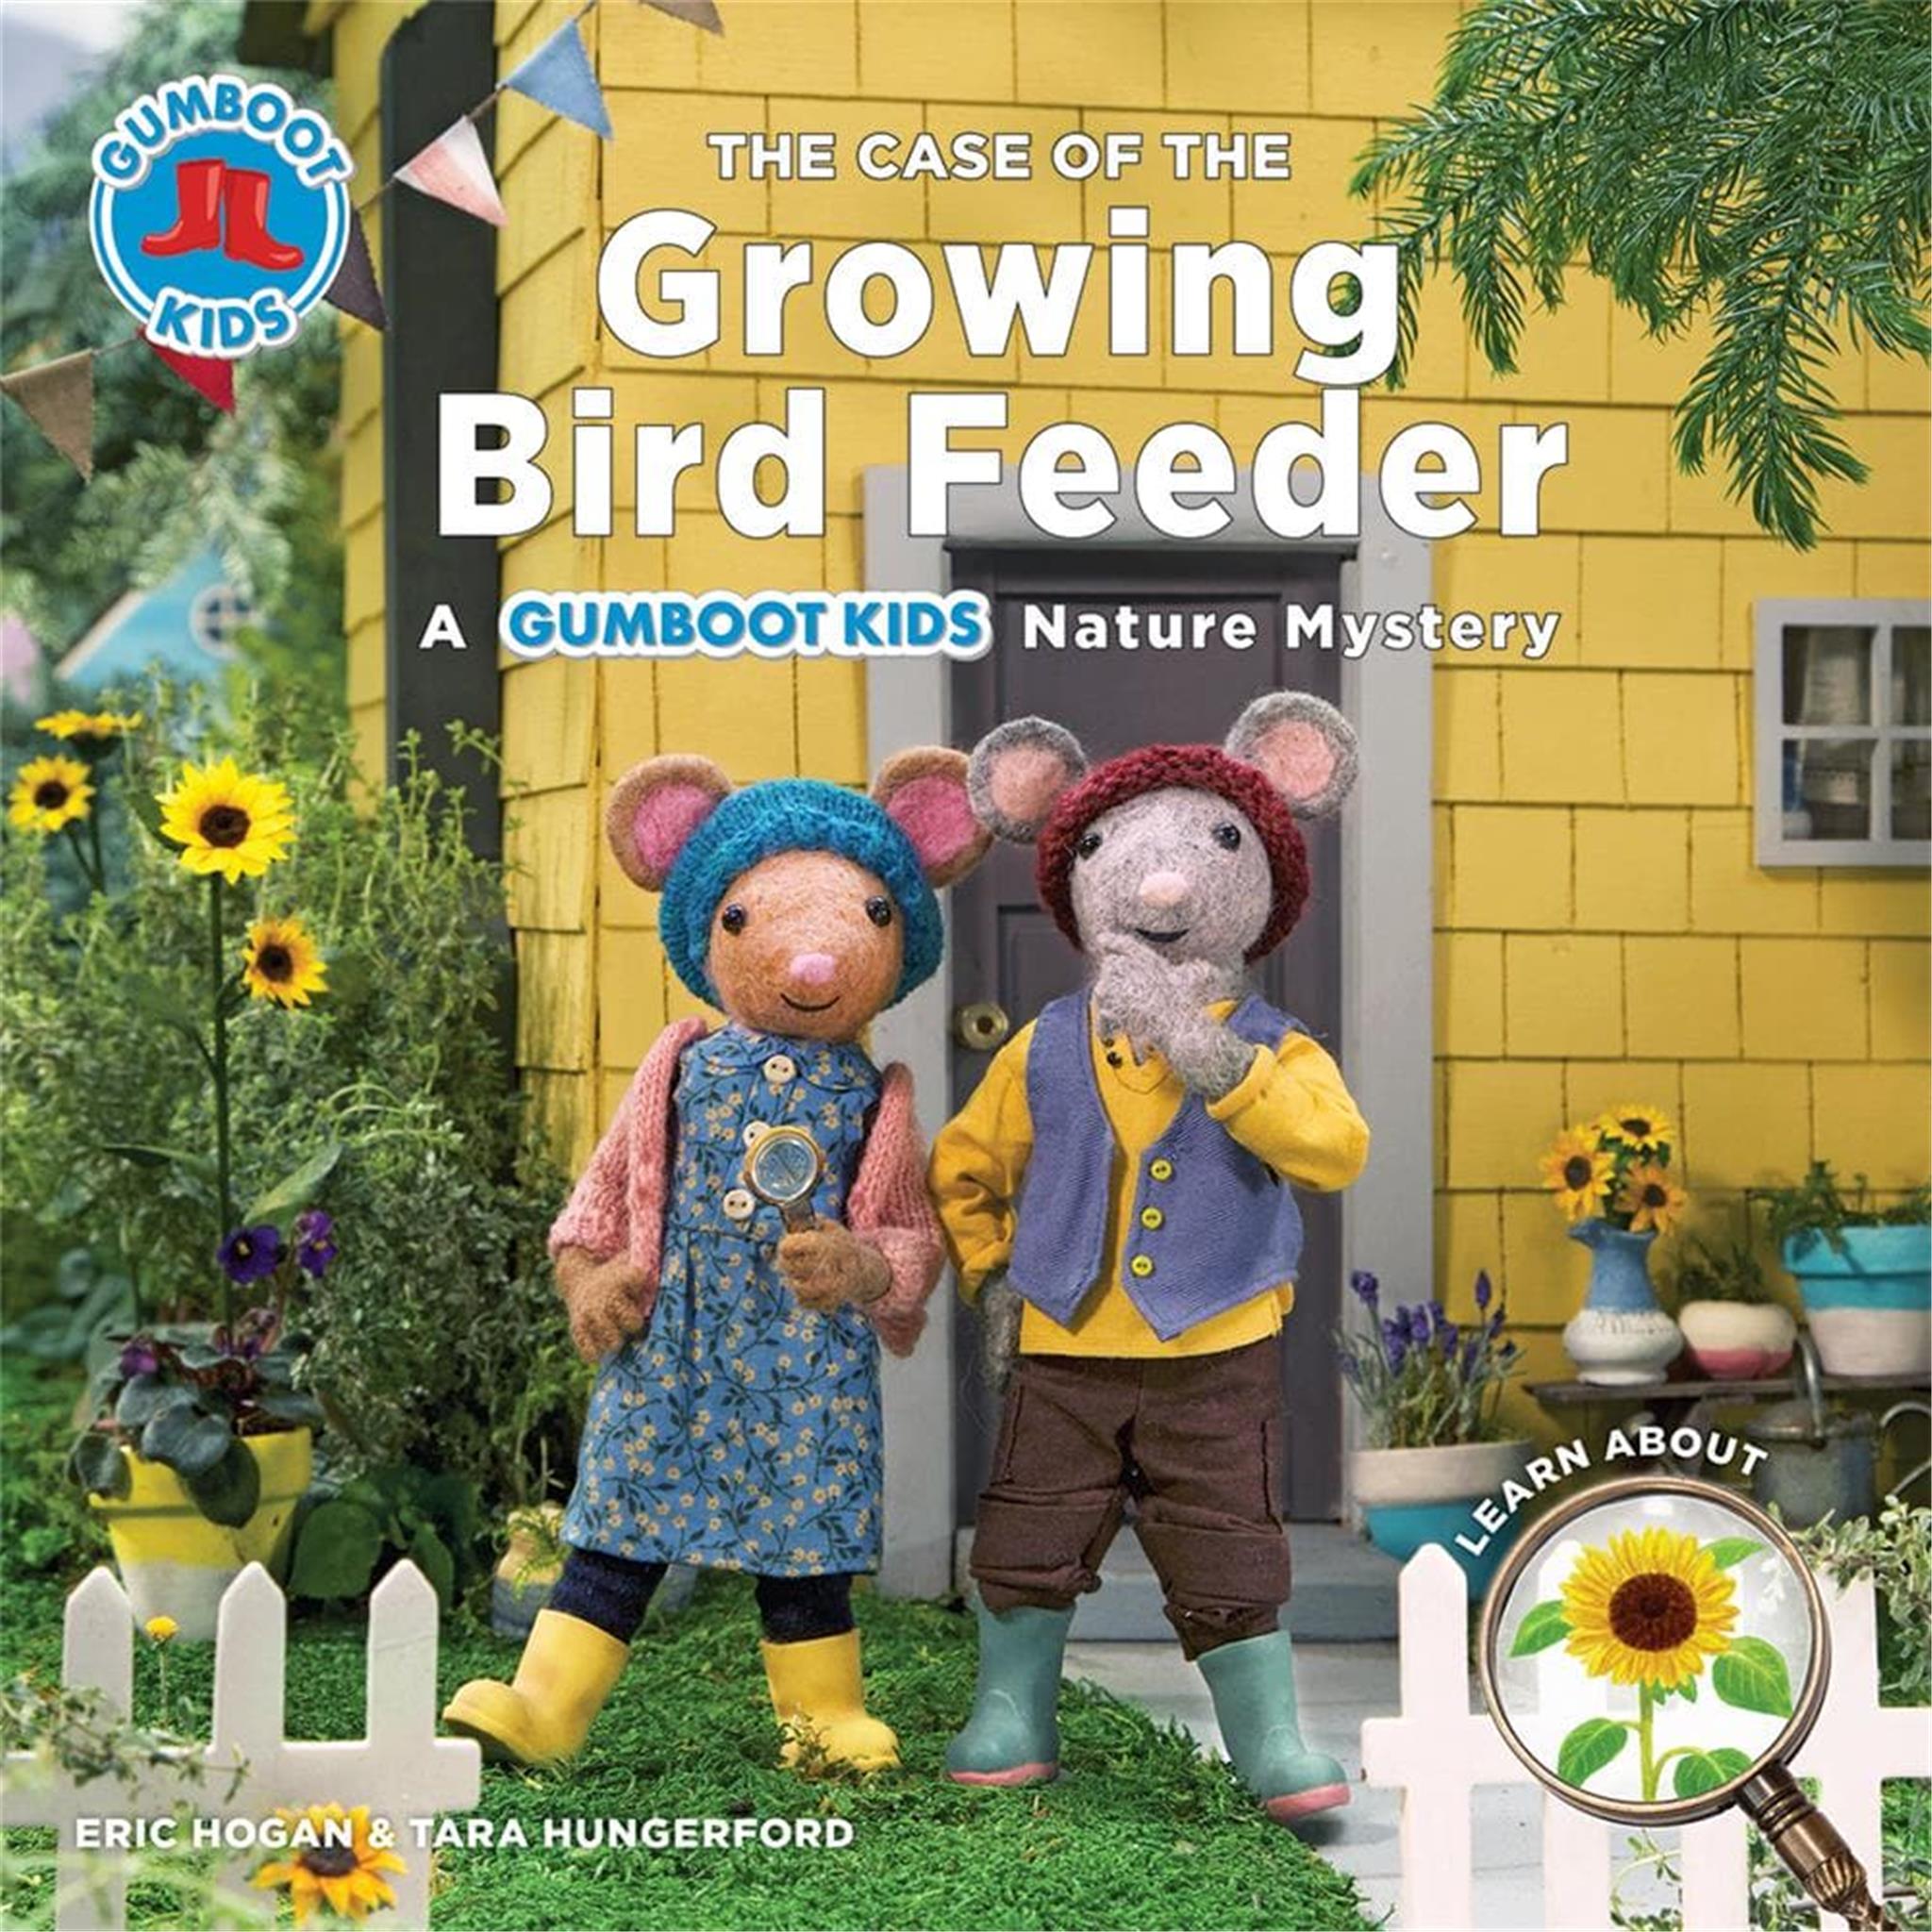 The Case of the Growing Bird Feeder: A Gumboot Kids Nature Mystery Book